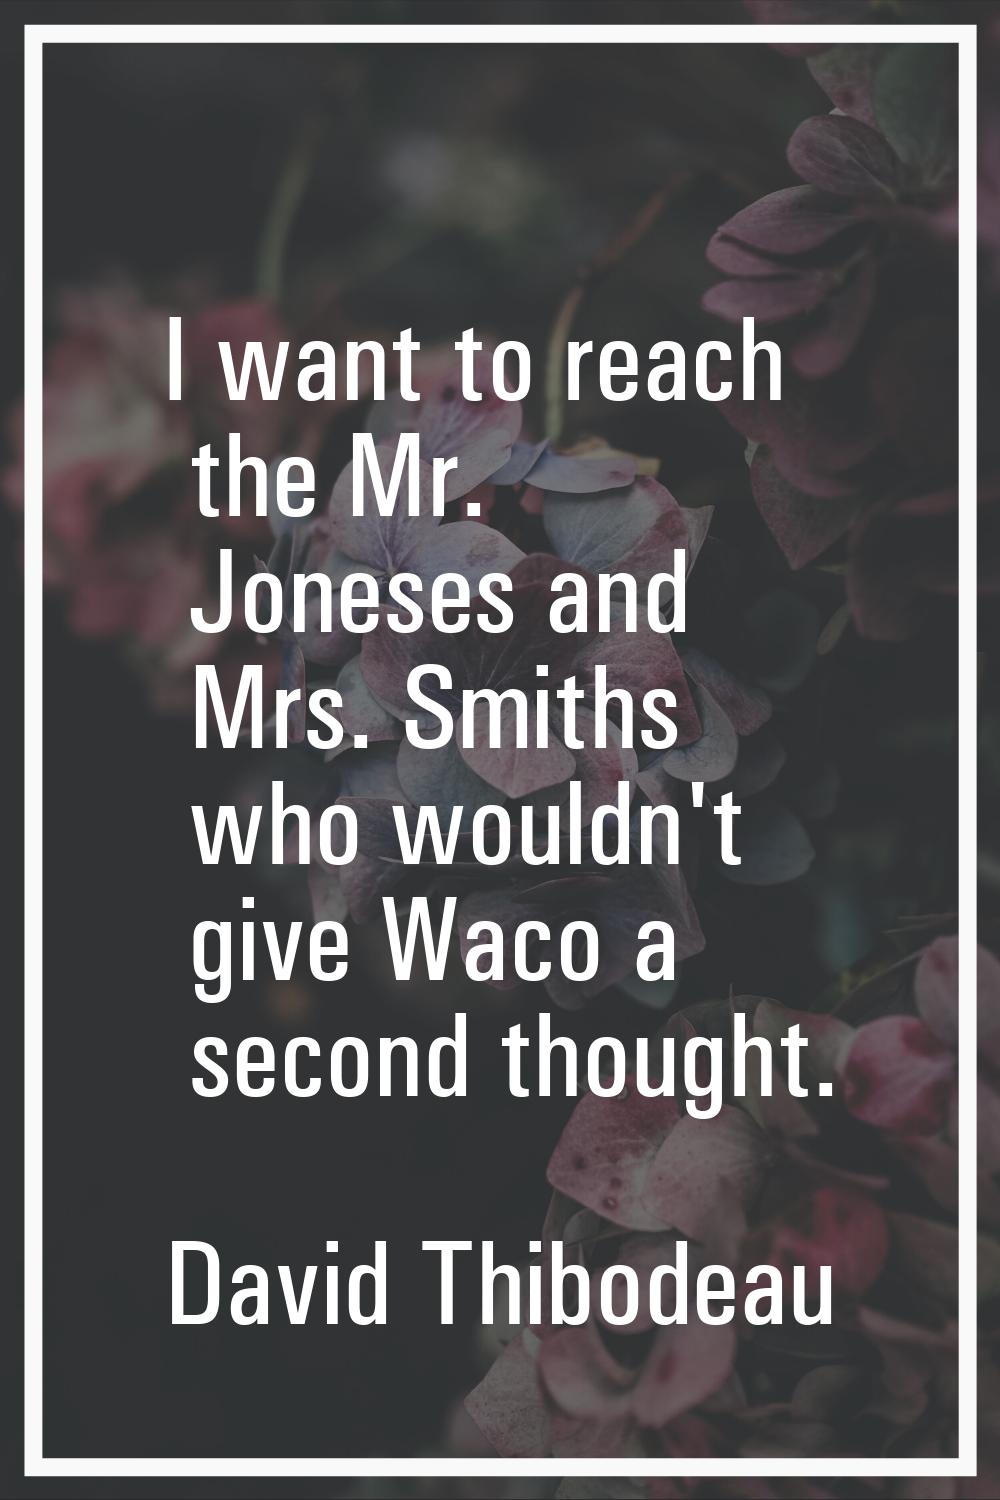 I want to reach the Mr. Joneses and Mrs. Smiths who wouldn't give Waco a second thought.